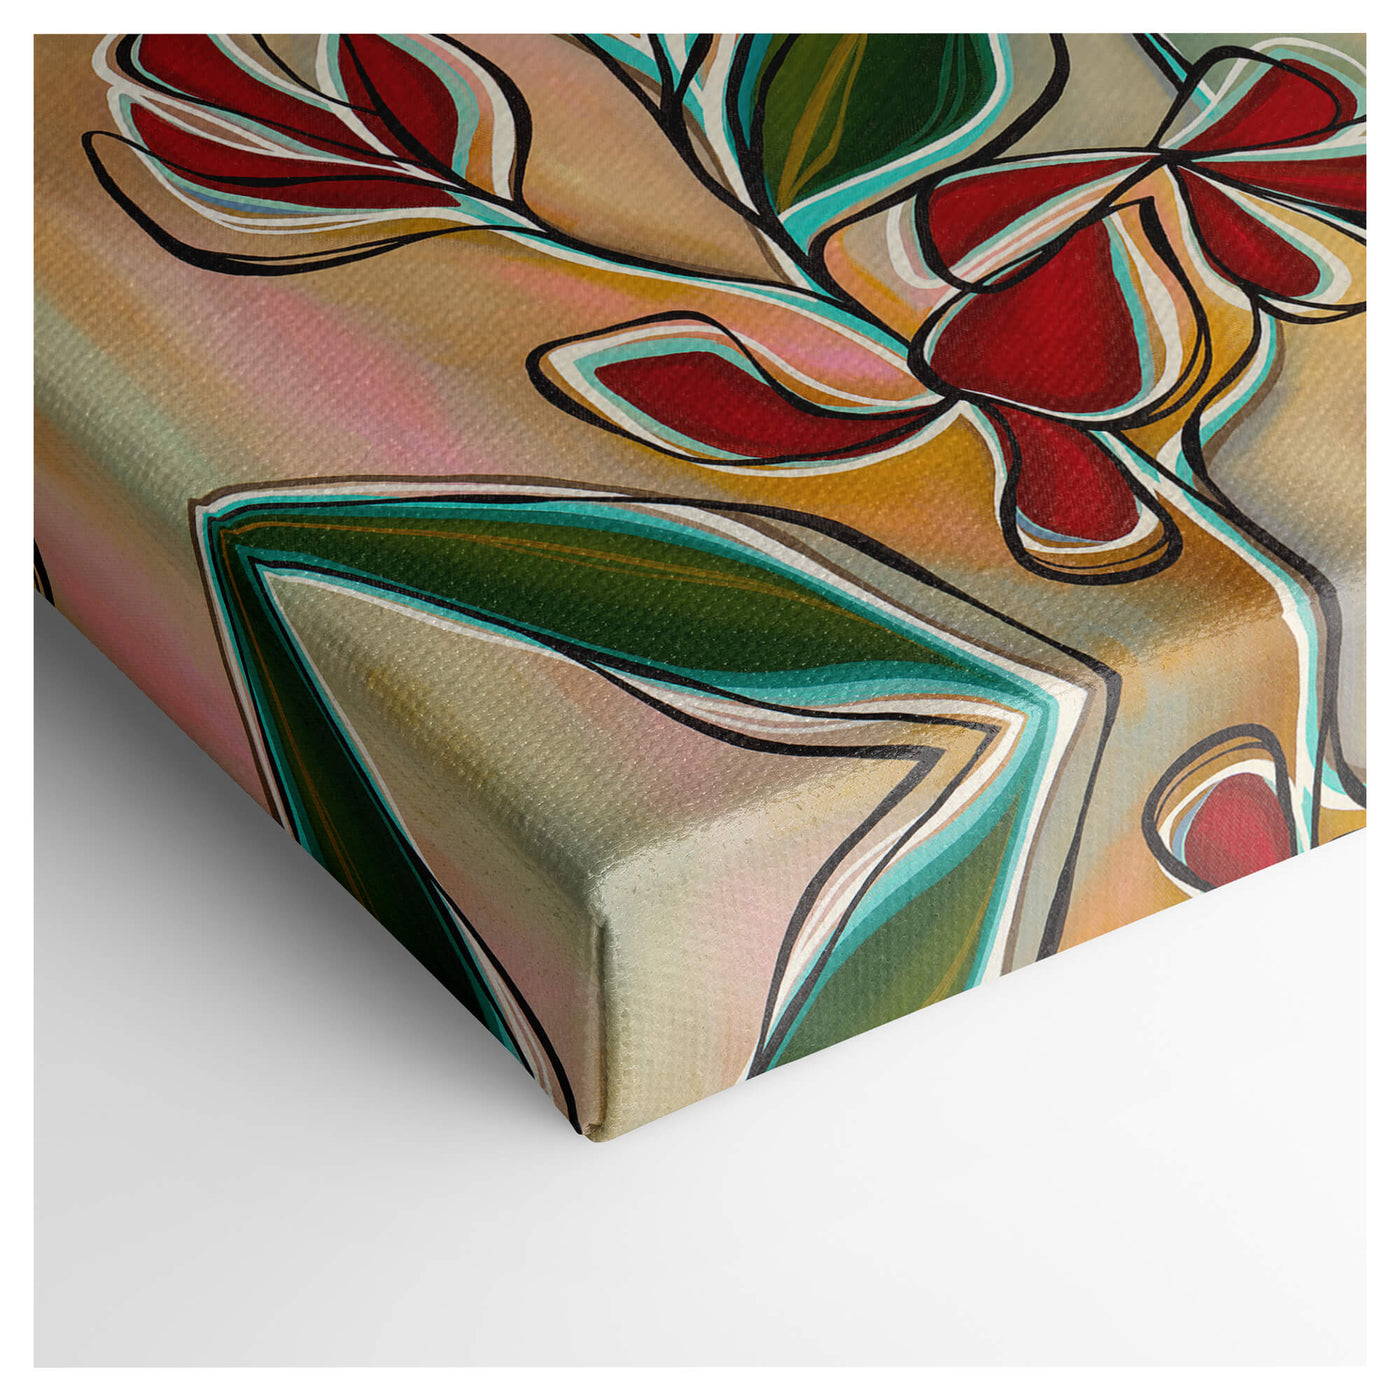 Gallery wrap of a red heliconia artwork by Hawaii surf artist Heather Brown